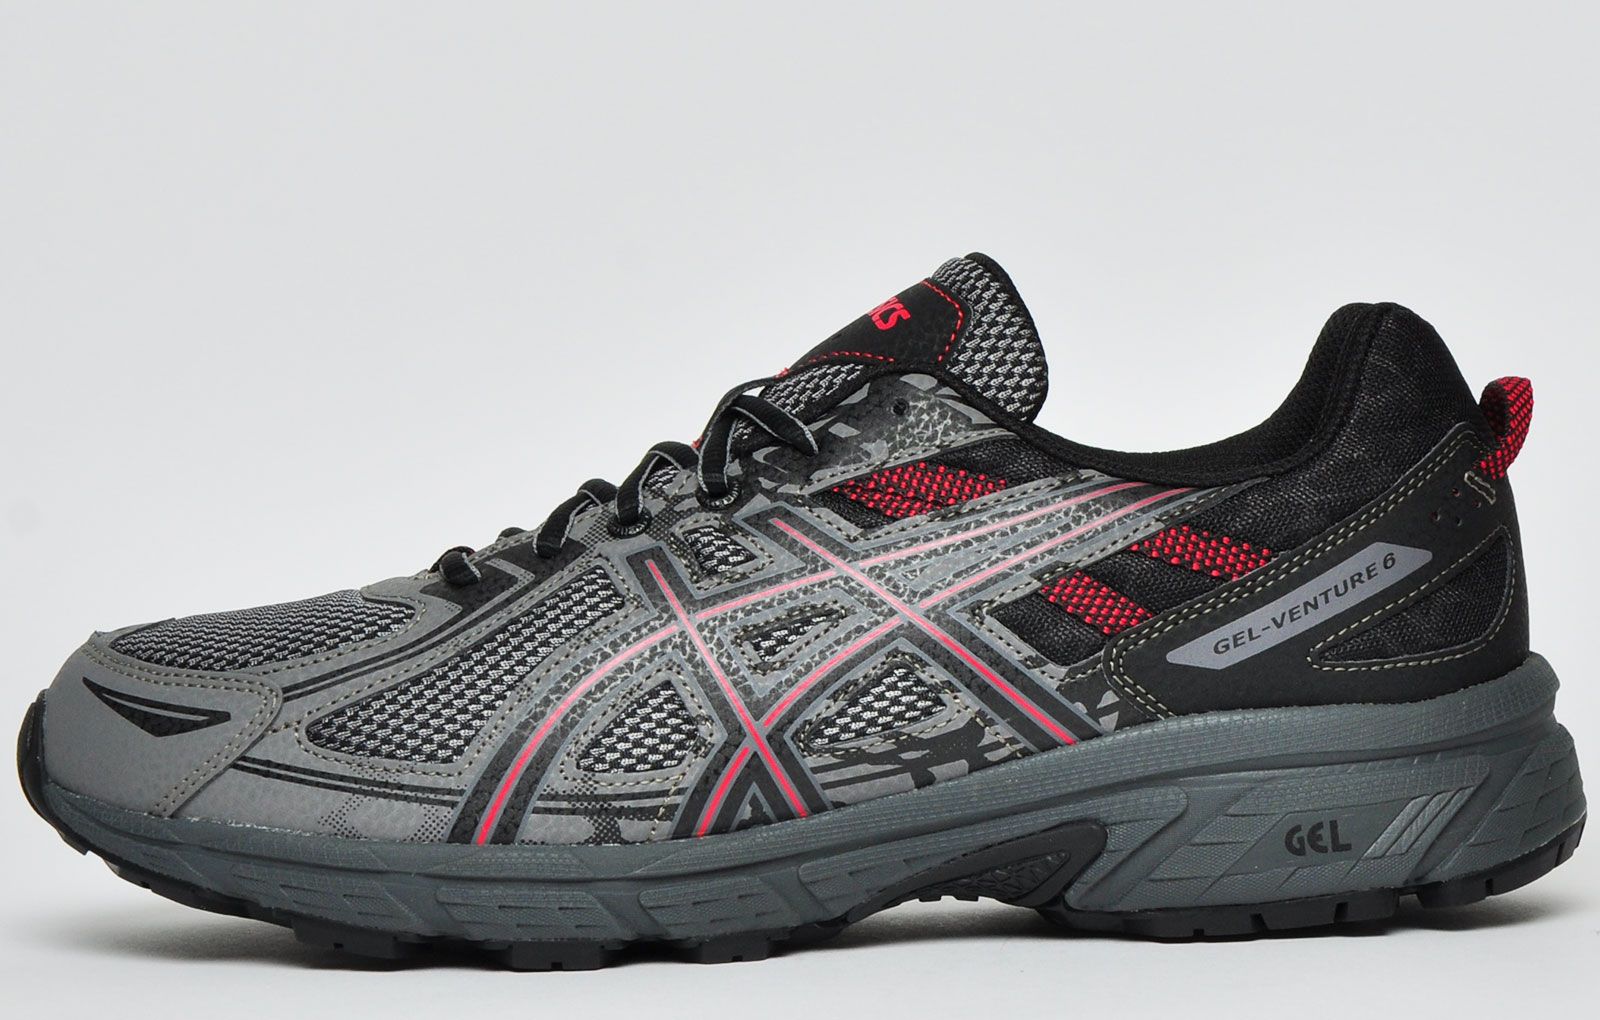 <p>These Asics Gel Venture 6 men’s all-terrain trail running shoes will provide excellent support and traction no matter what comes your way. Featuring a practical lugged outsole that offers grip on uphill and downhill conditions. Whether you’re a beginner or professional, these all terrain running shoes are perfect for you! Engineered from a fusion of textile mesh and synthetic materials, these Asics Gel Venture 6 men’s all-terrain running shoes feature a practical lightweight design with maximum performance capabilities, the Asics Venture 6 is a must have on and off road shoe that will deliver on every front.</p> <p>- Textile mesh upper construction enhances ventilation </p> <p>- Supportive synthetic overlays deliver the perfect fit </p> <p>- Stitched Toe Bumper delivers extra protection against trail hazards</p> <p>- Removable Sockliner delivers super comfy wear</p> <p>- Reaarfoot Gel cushioning system delivers shock resistance</p> <p>- Trustic system reduces weight whilst upkeeping the support </p> <p>- Asics Branding throughout</p>